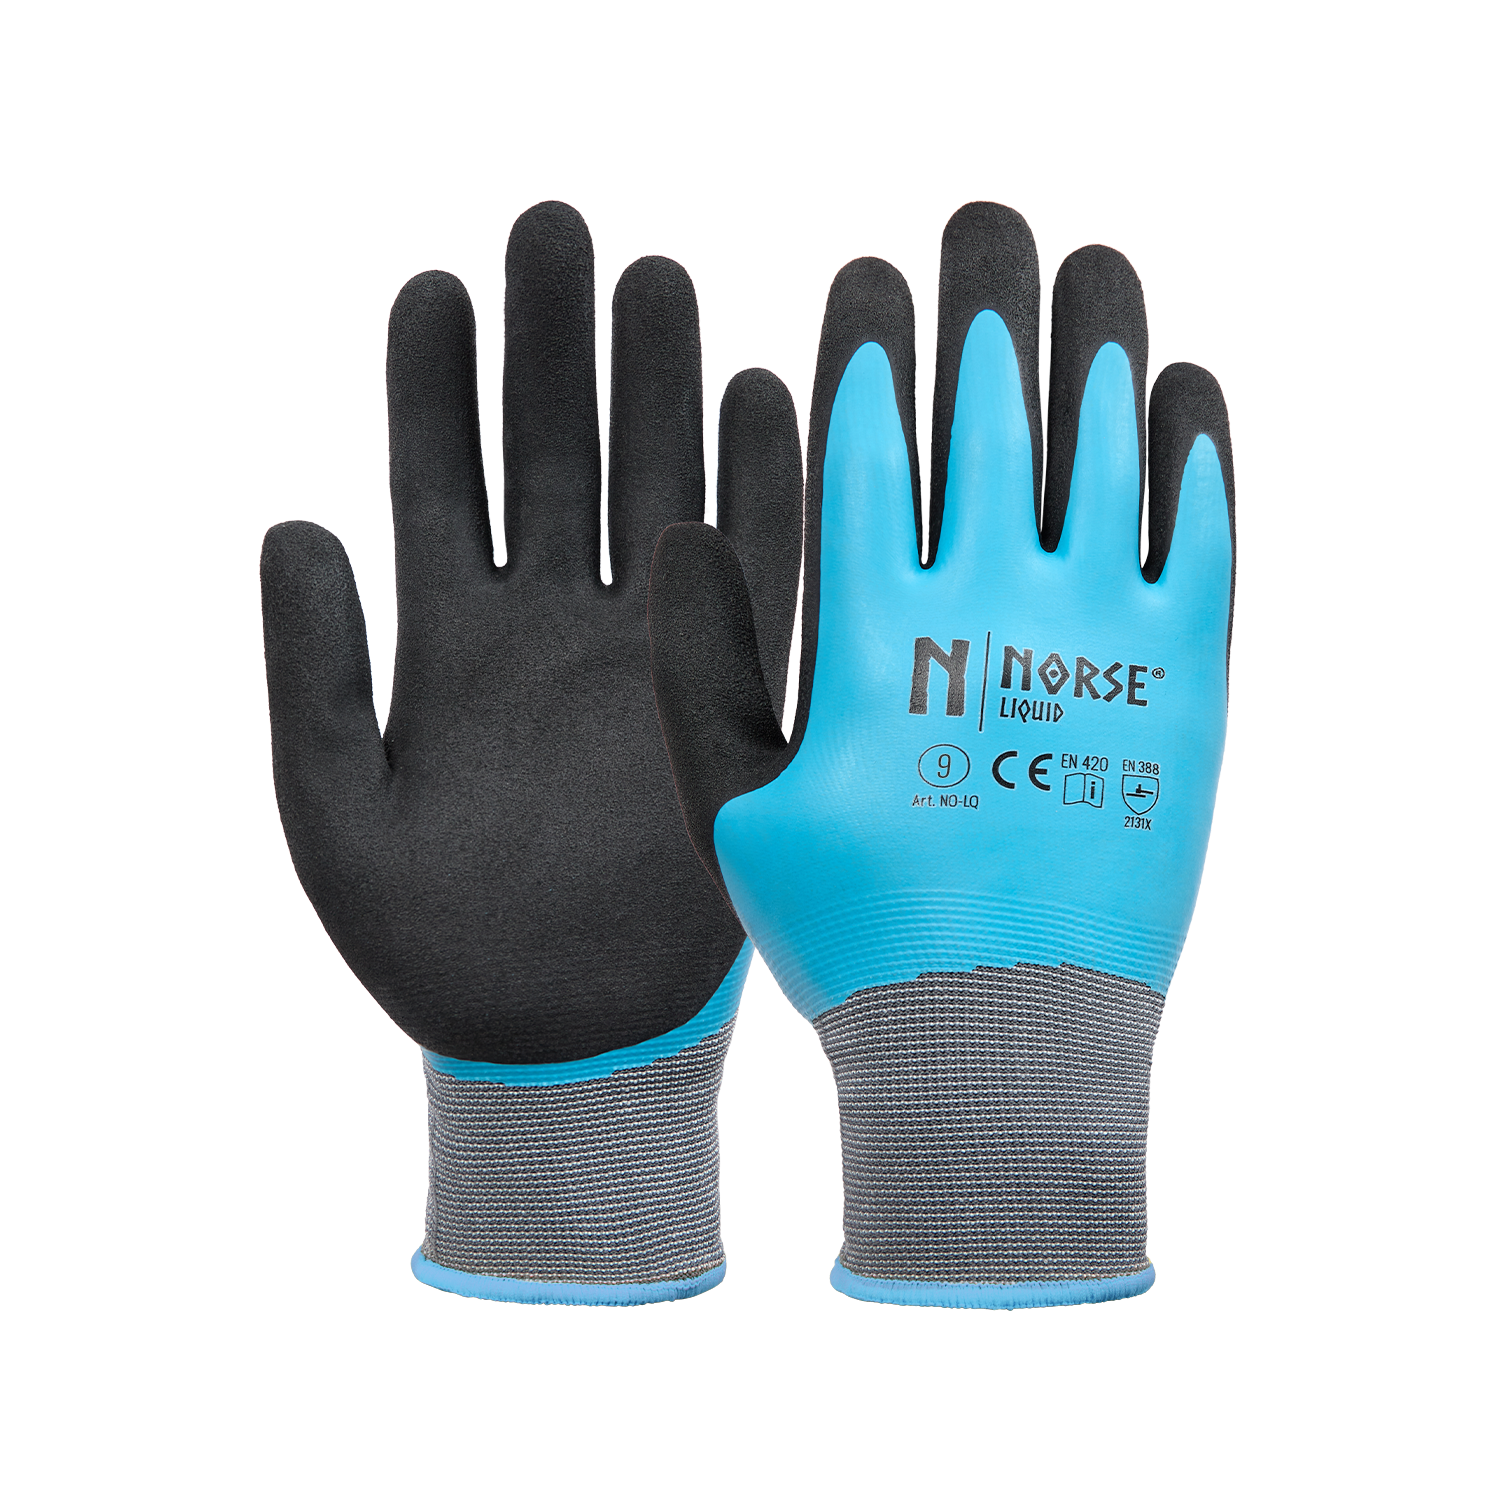 NORSE Liquid Waterproof assembly gloves size 9